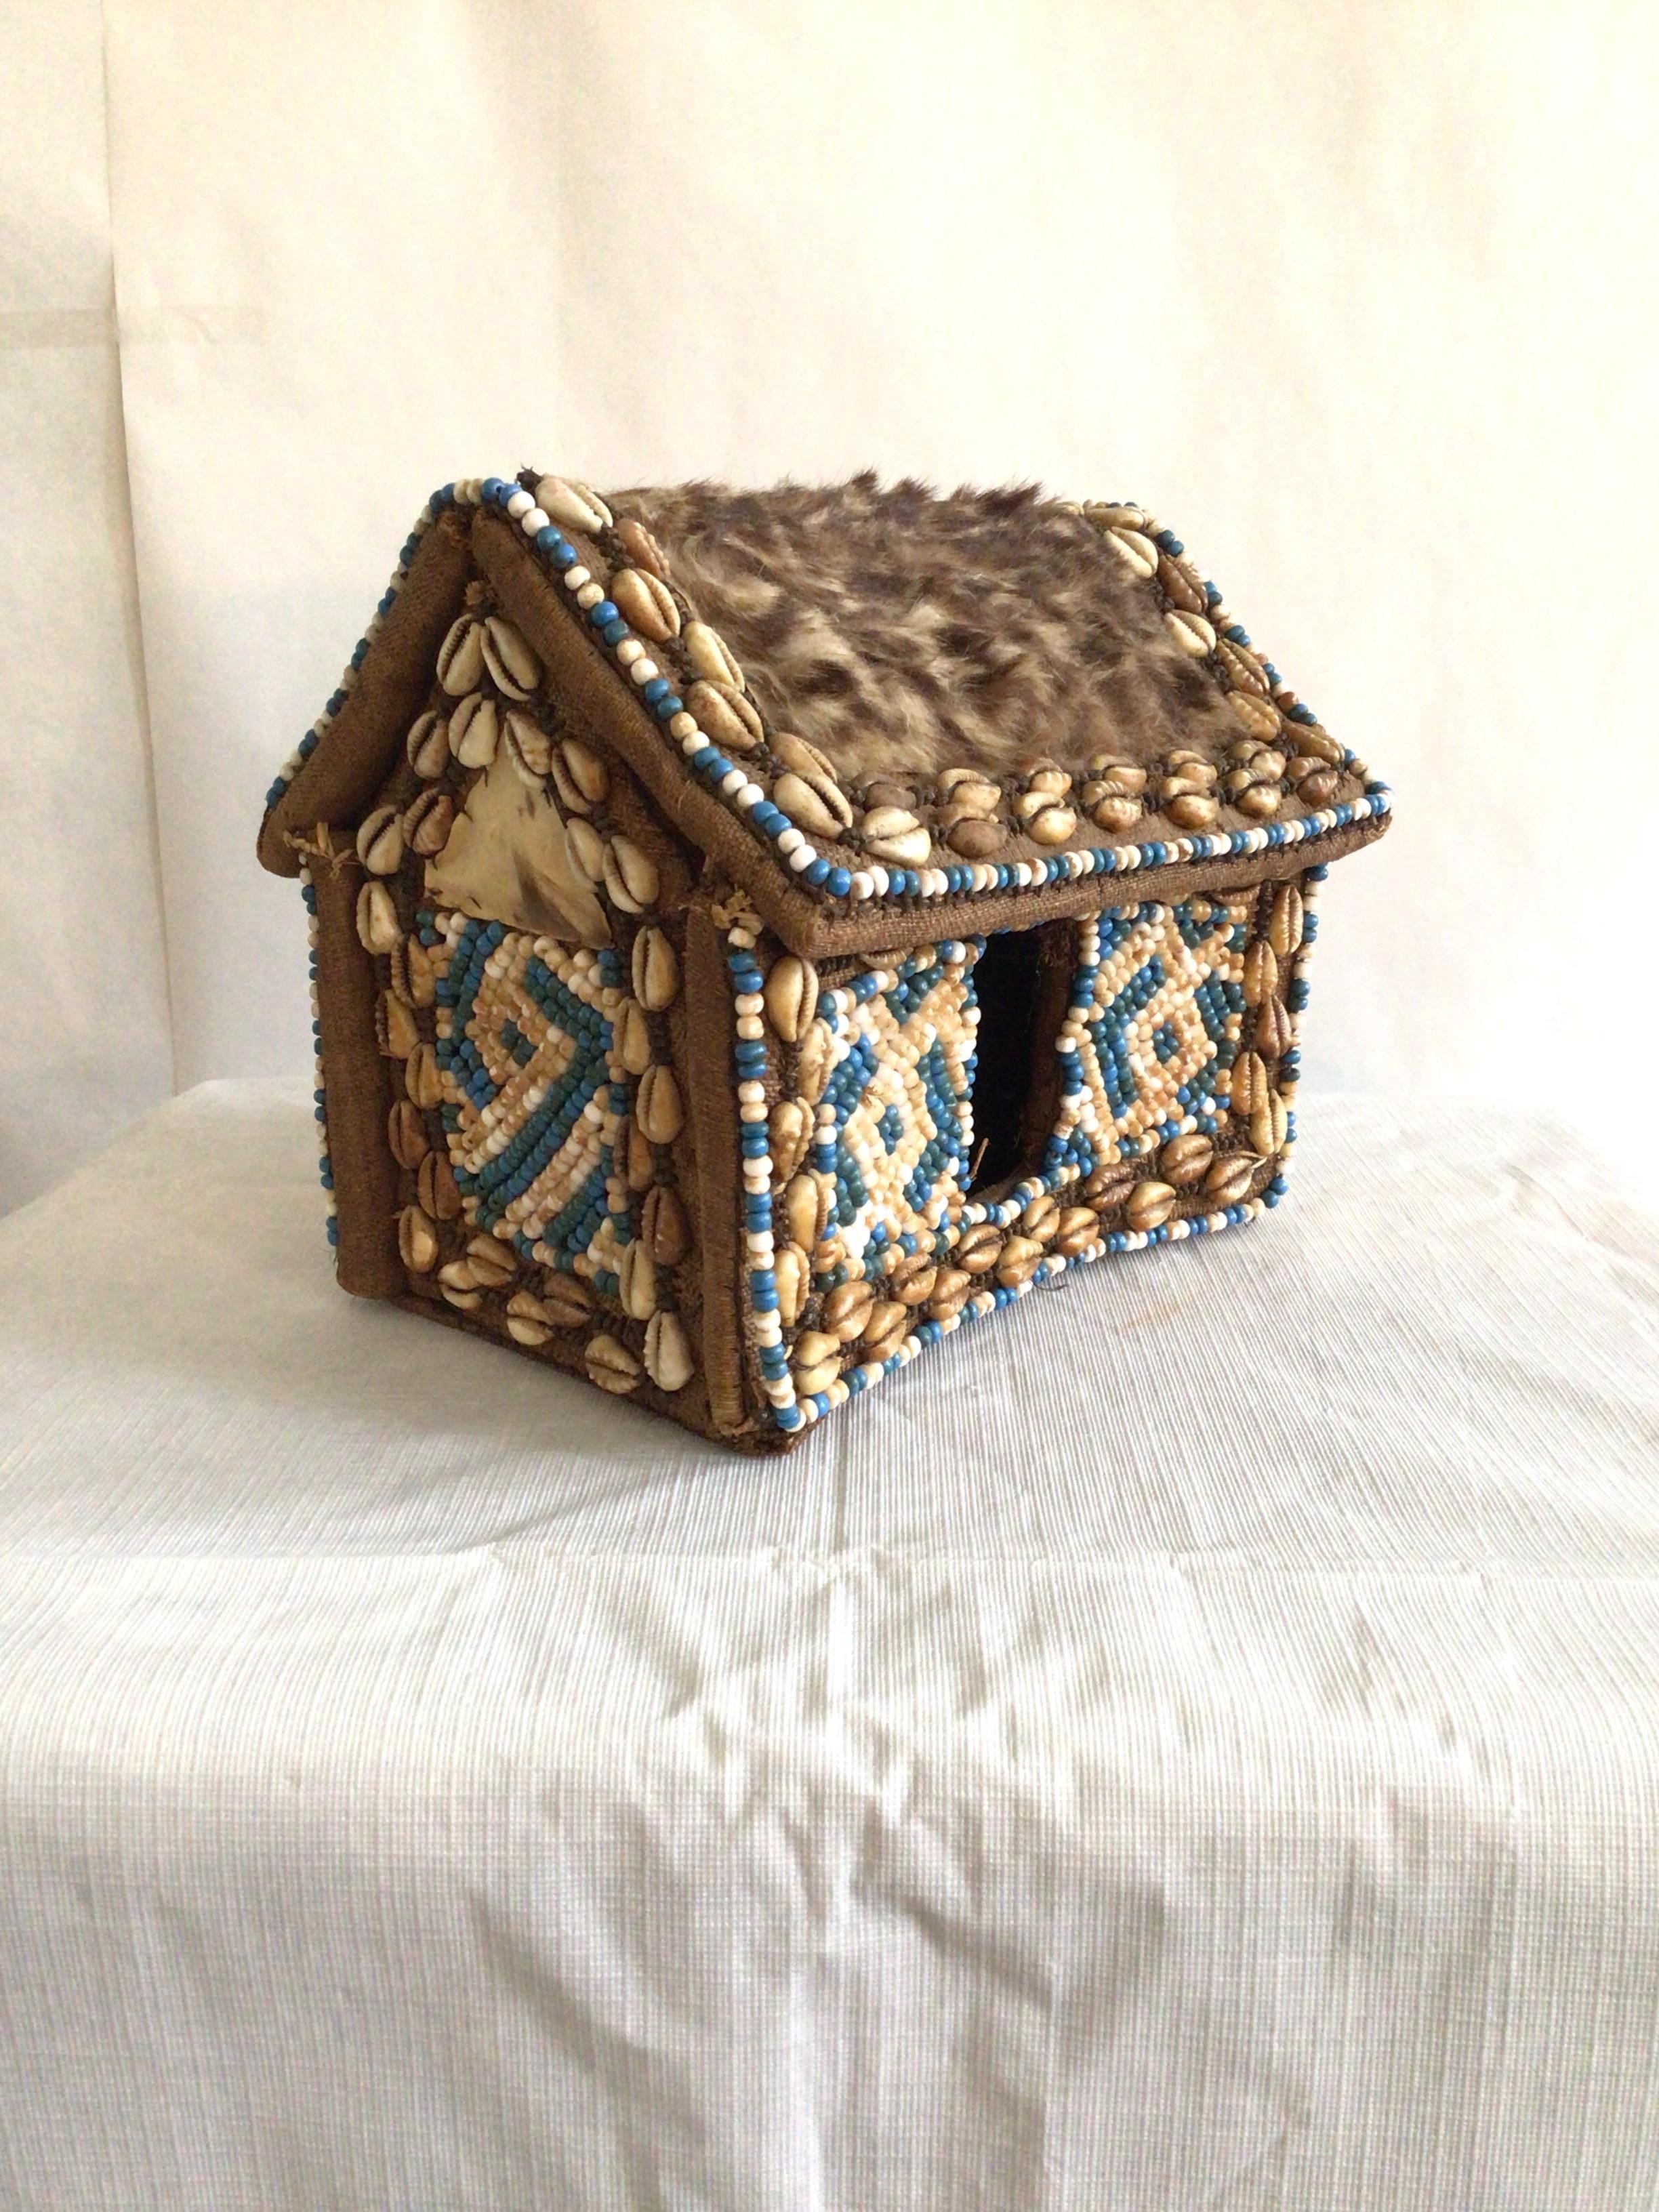 1960s Hand-Made African Tabletop Hut with Cowry or cowrie Shells, blue and cream Beading, fur, and fabric.